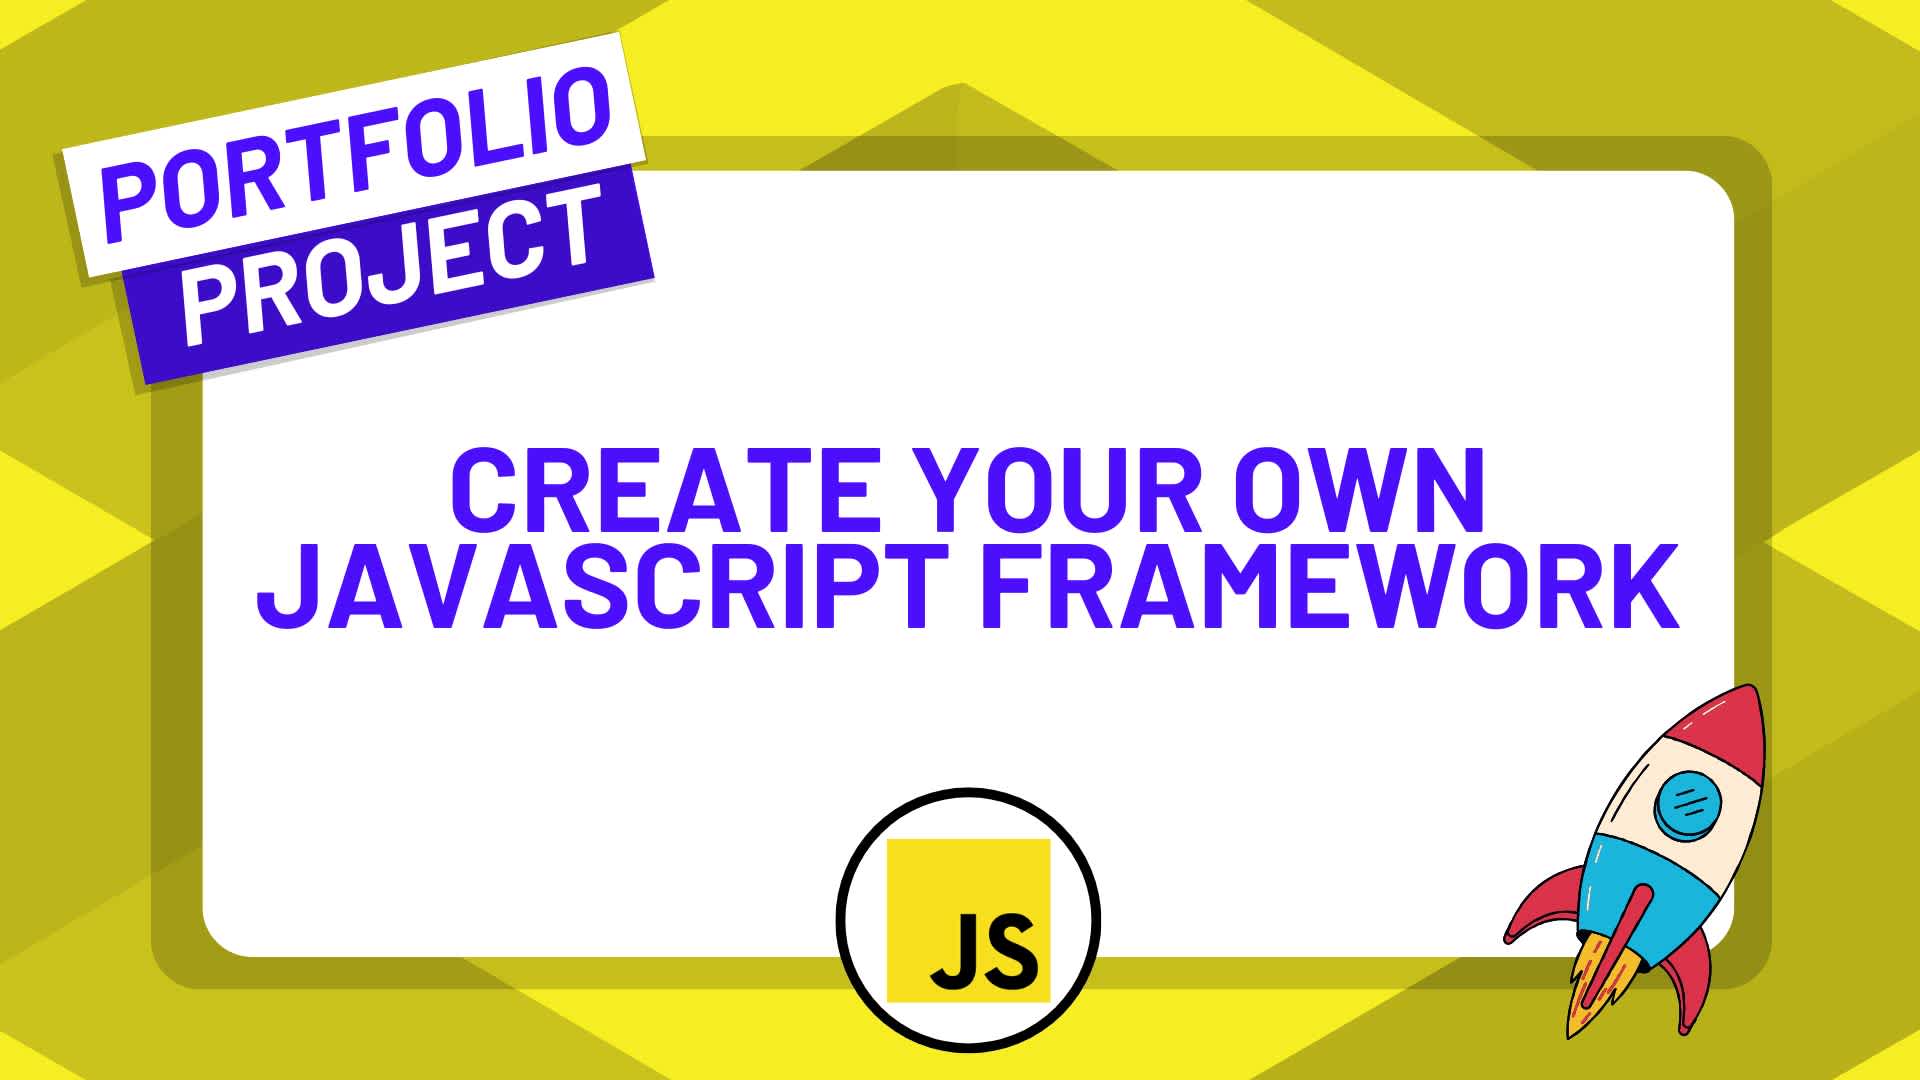 Conquer JavaScript by Building Your Own Framework from Scratch